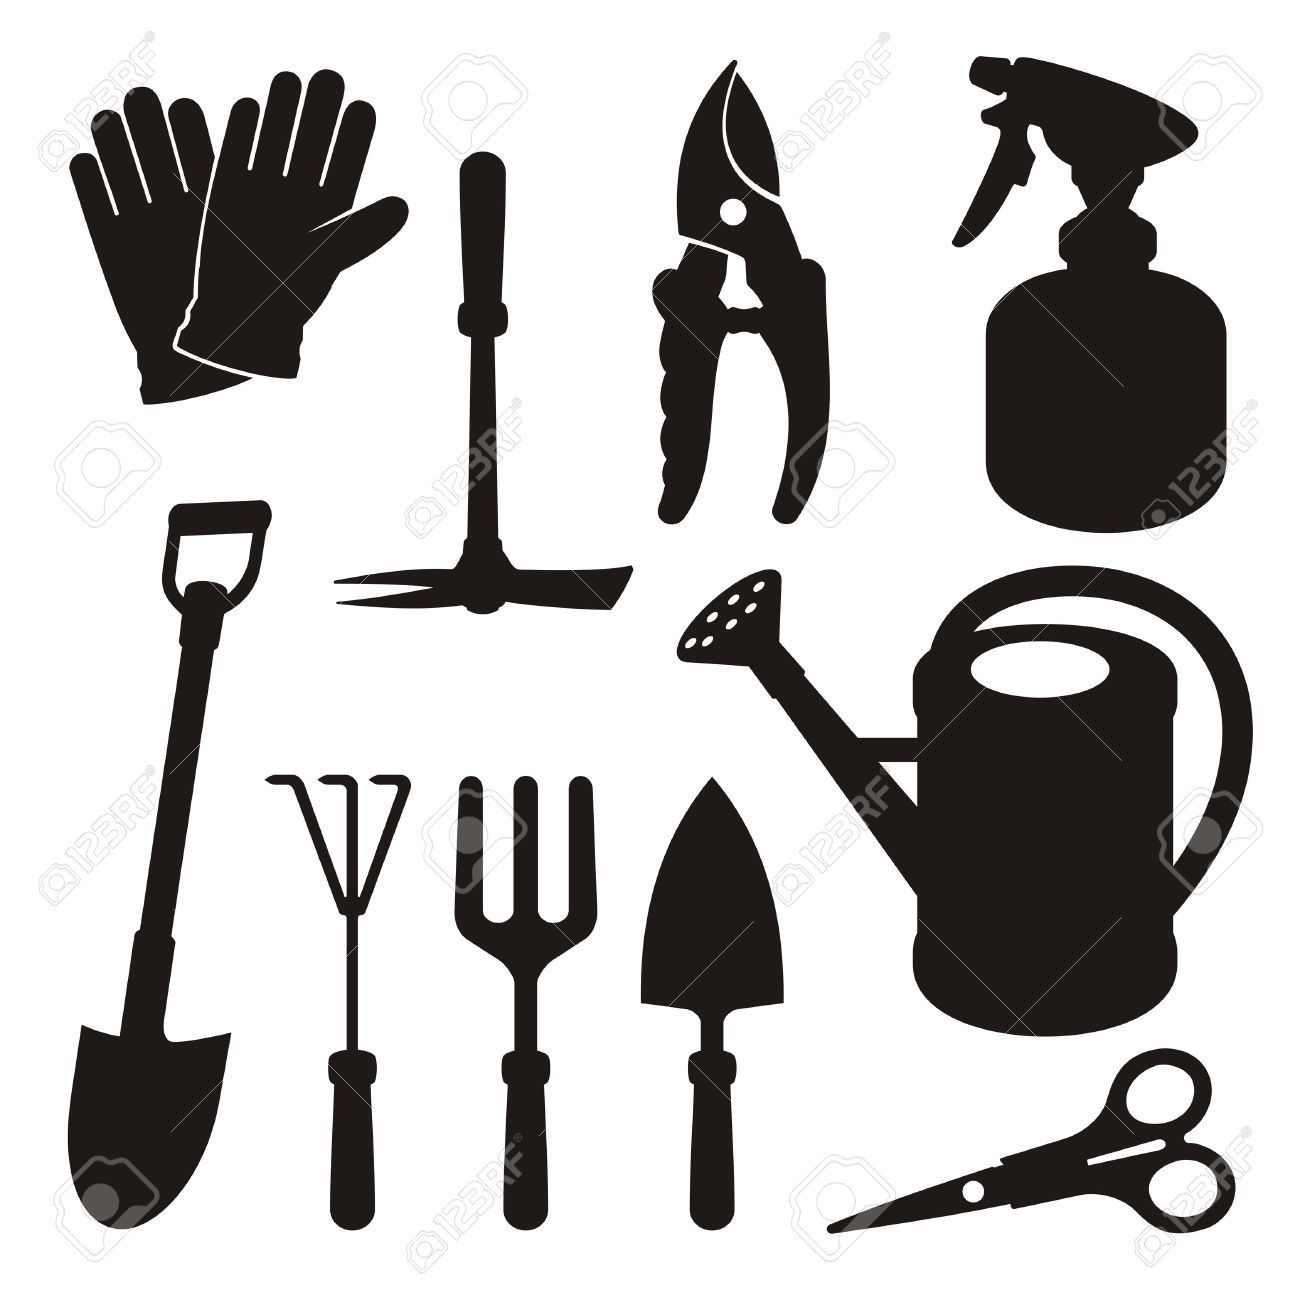 Gardening Tools Stock Illustrations, Cliparts And Royalty.